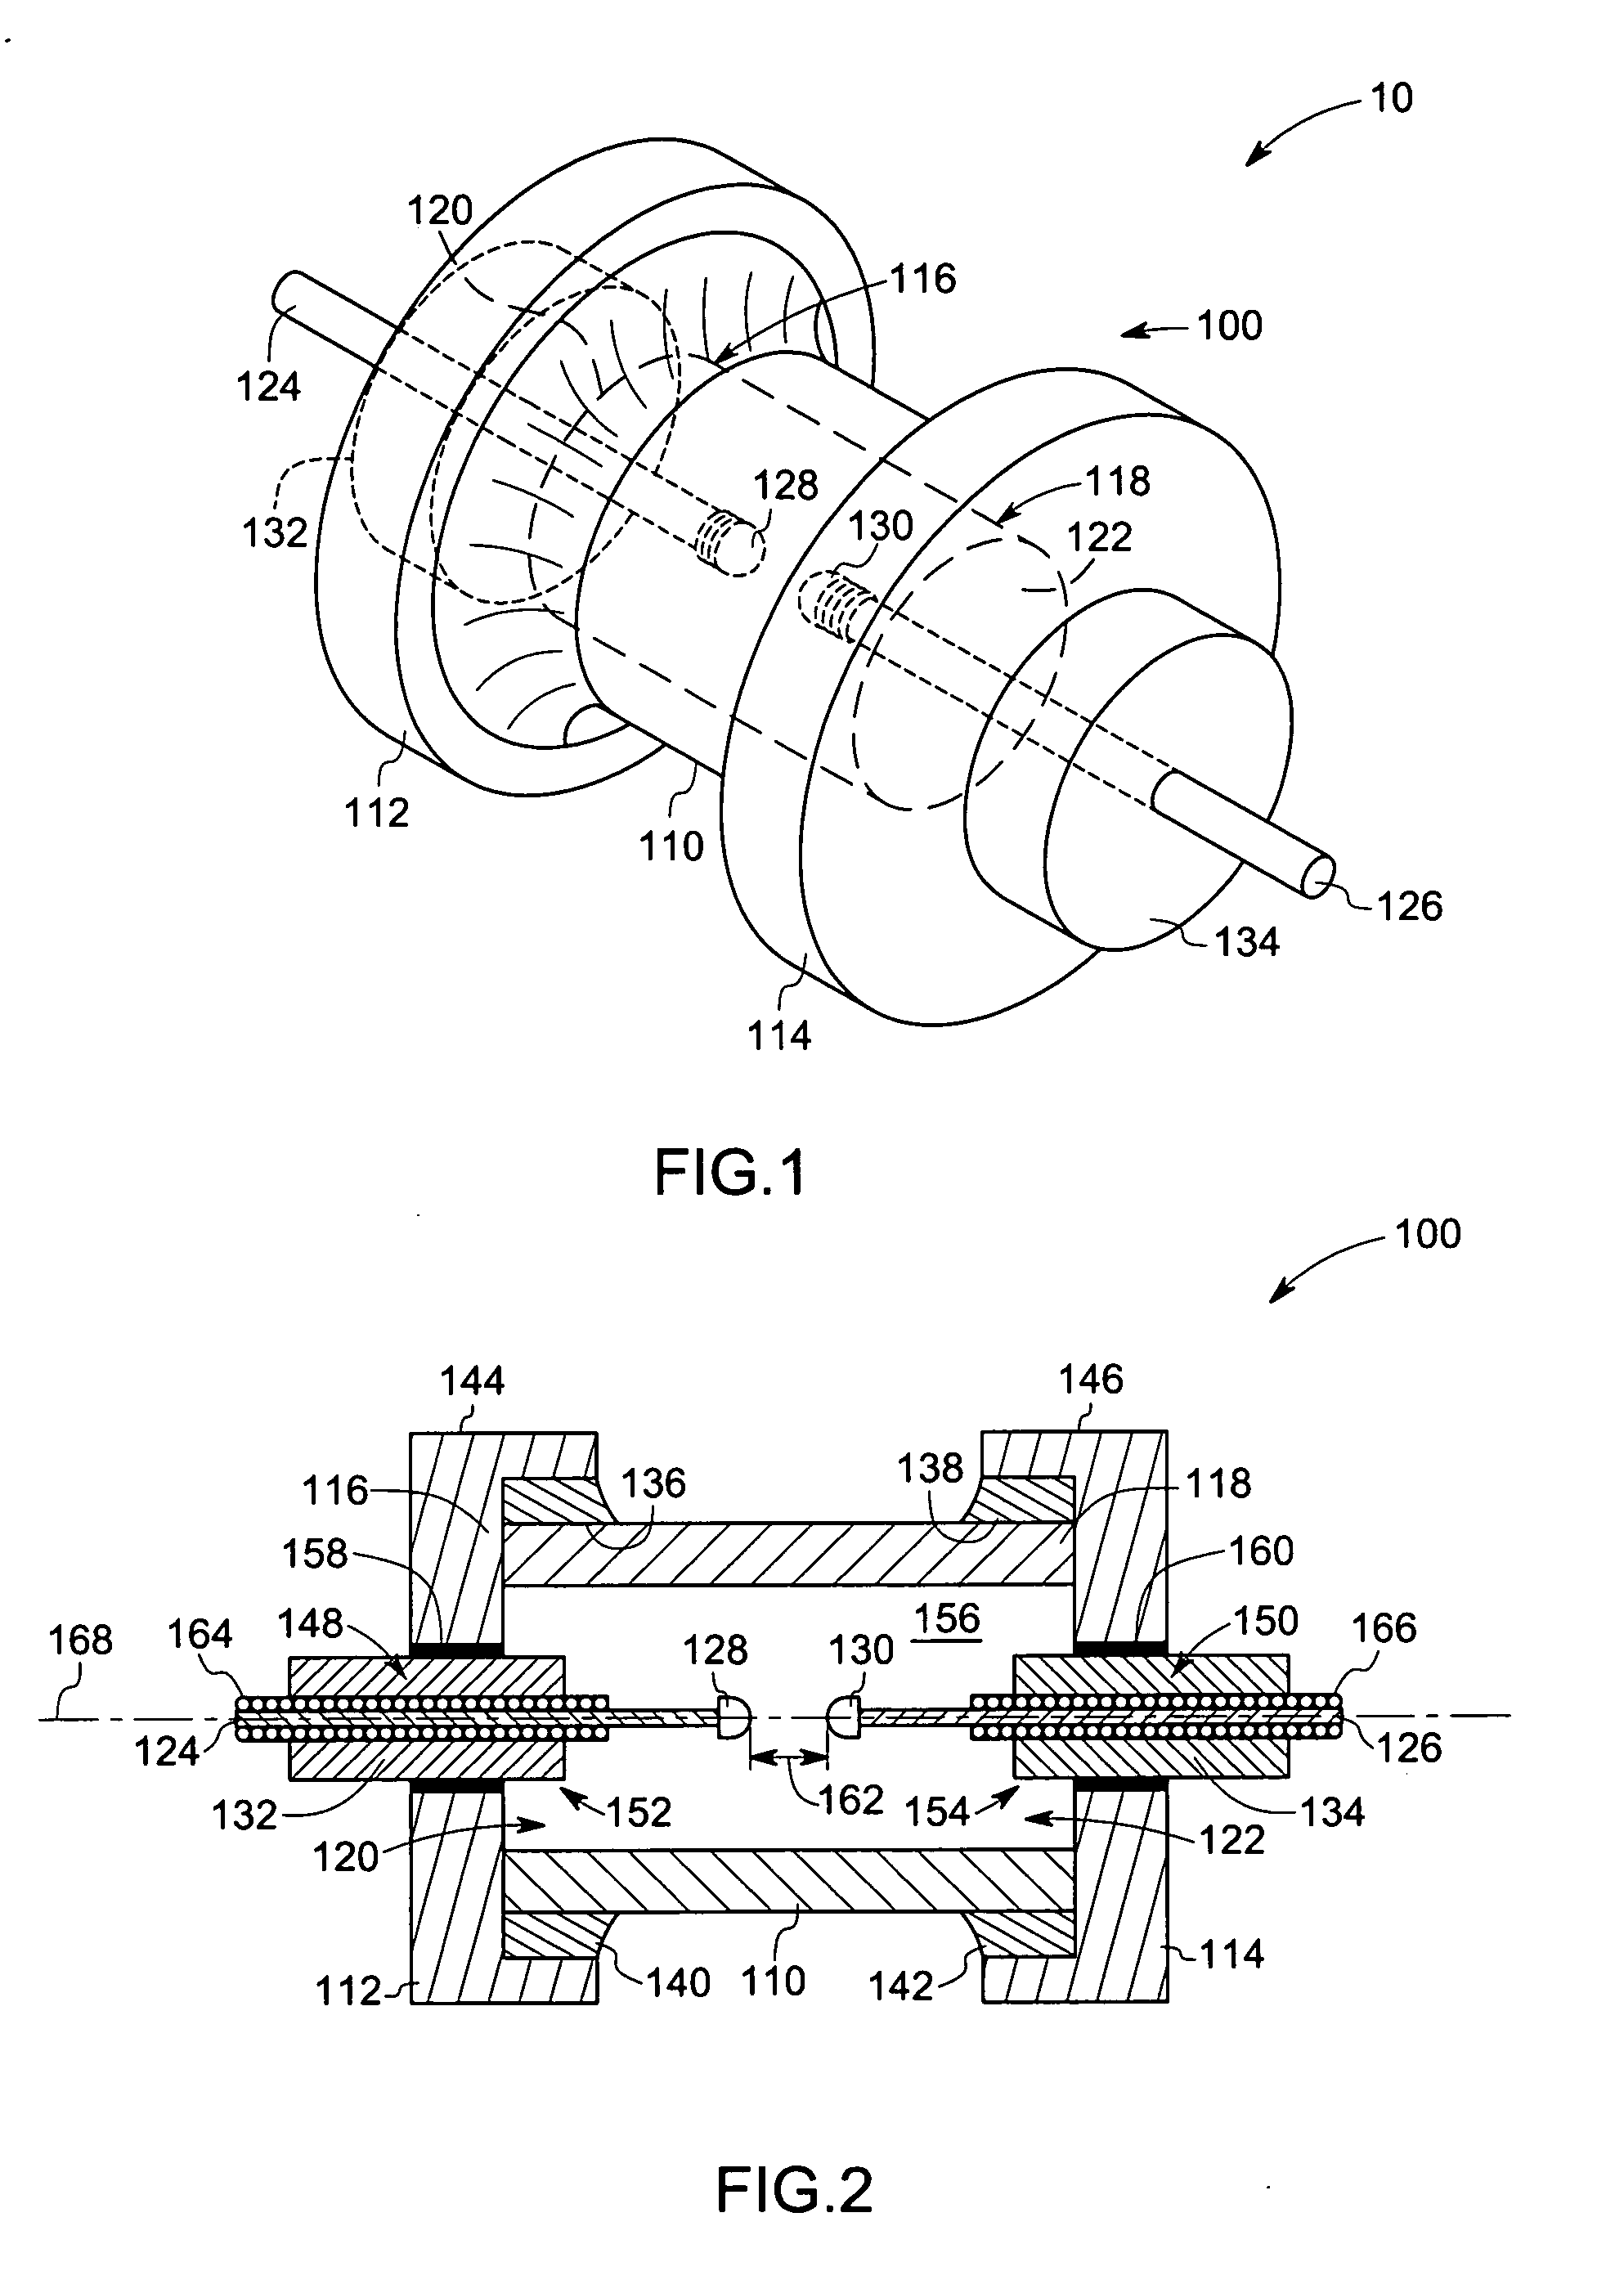 Ceramic lamp having molybdenum-rhenium end cap and systems and methods therewith